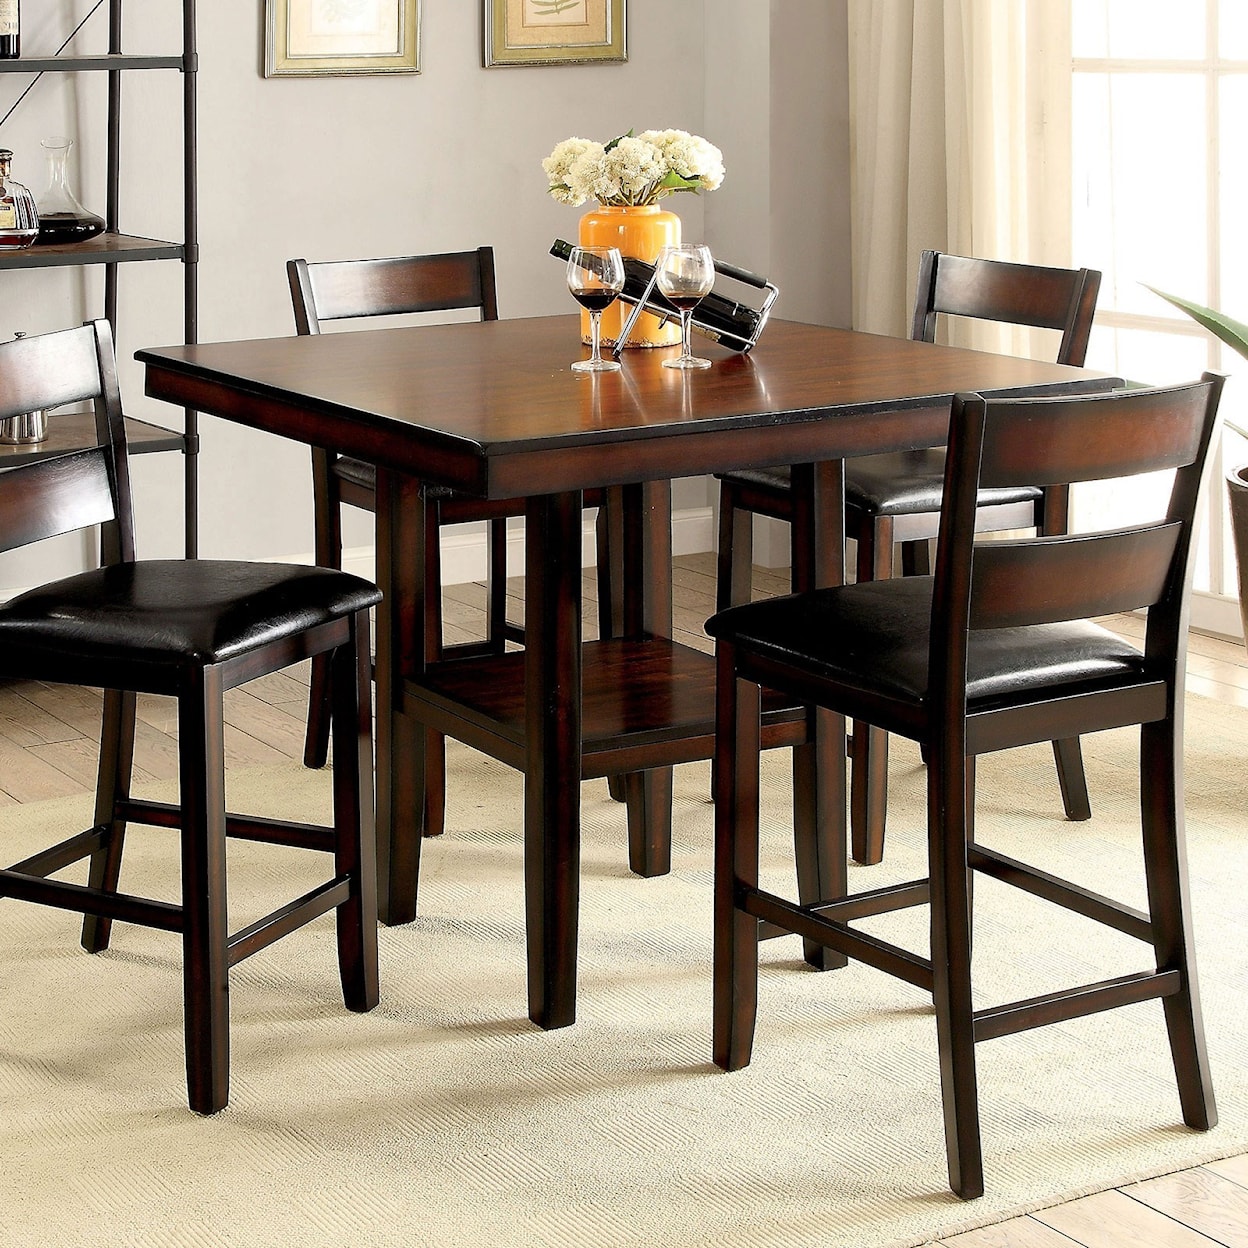 Furniture of America Norah II 5 Piece Counter Height Table Set